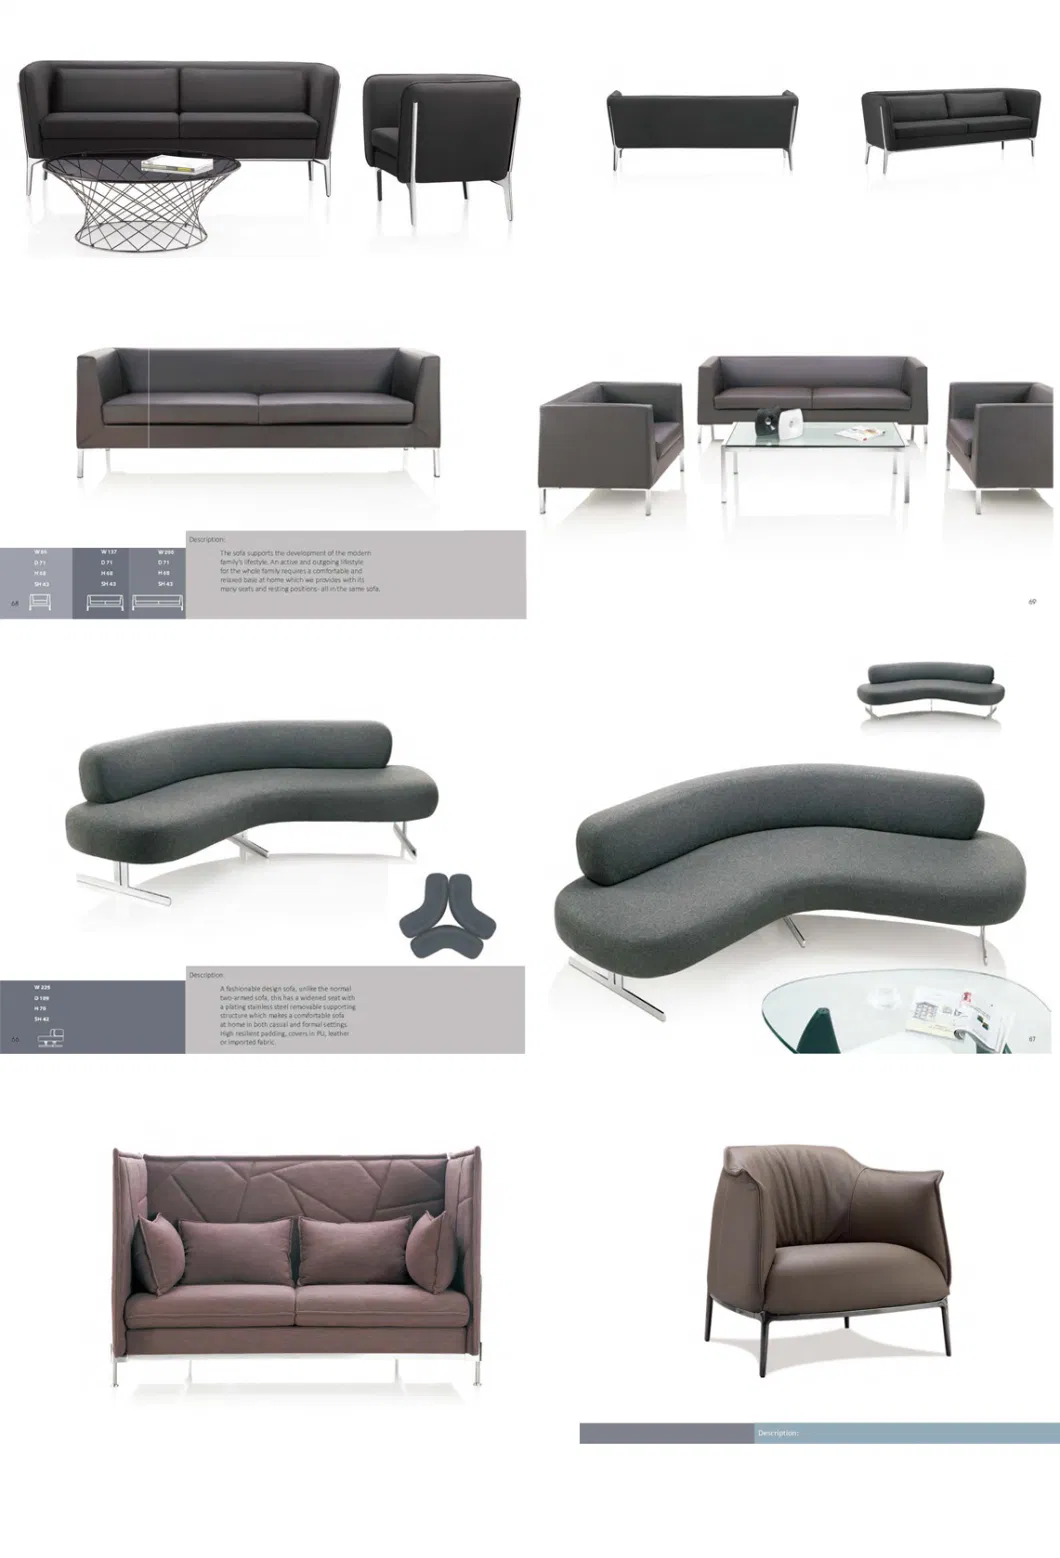 Sectional Sofa Italian Furniture New Model Sofa Sets Pictures Buy Furniture